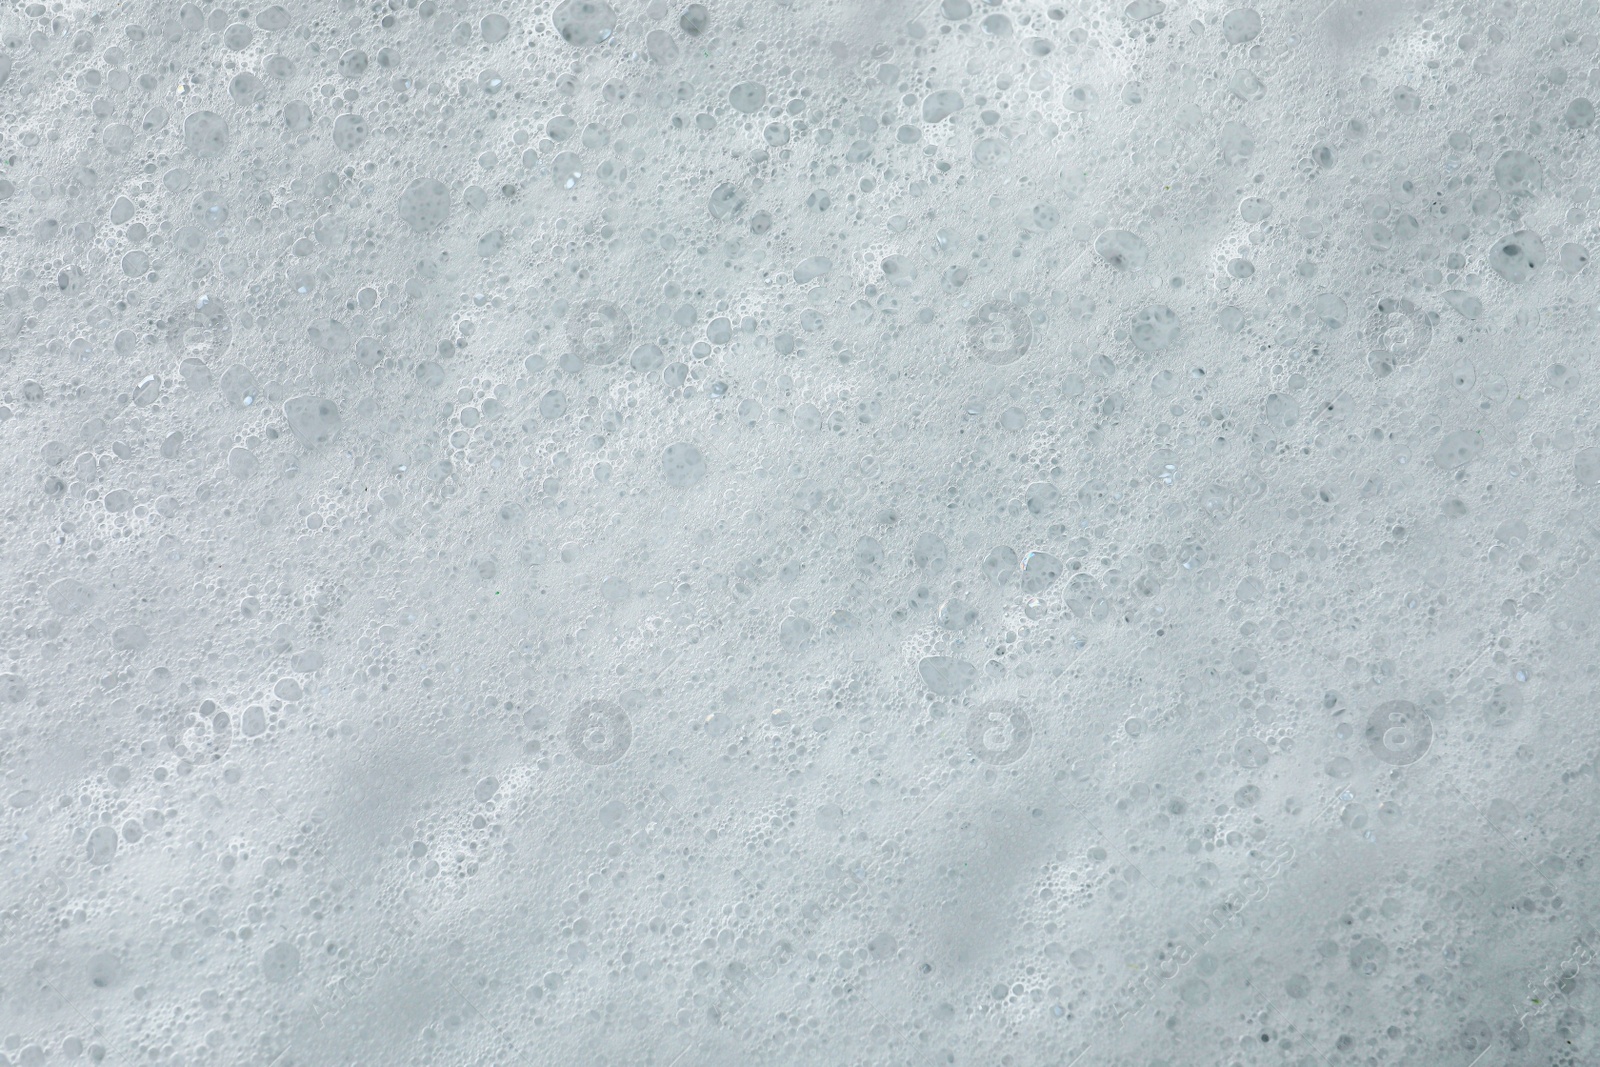 Photo of Fluffy soap foam as background, top view